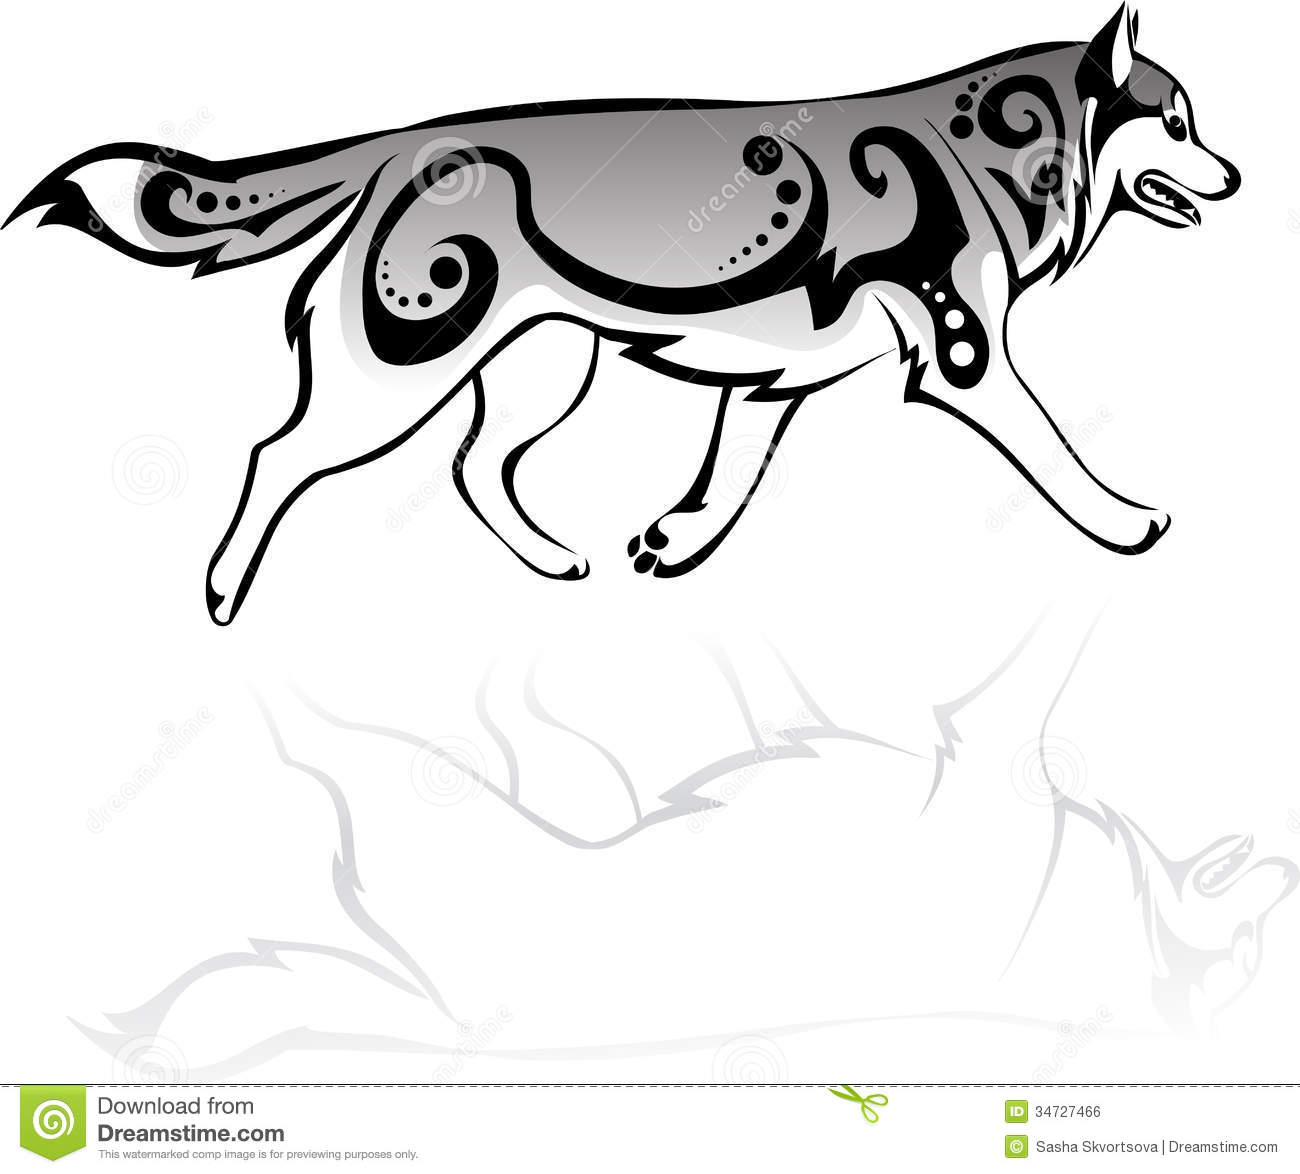 Running Wolf Clipart Running Wolf With Patterns